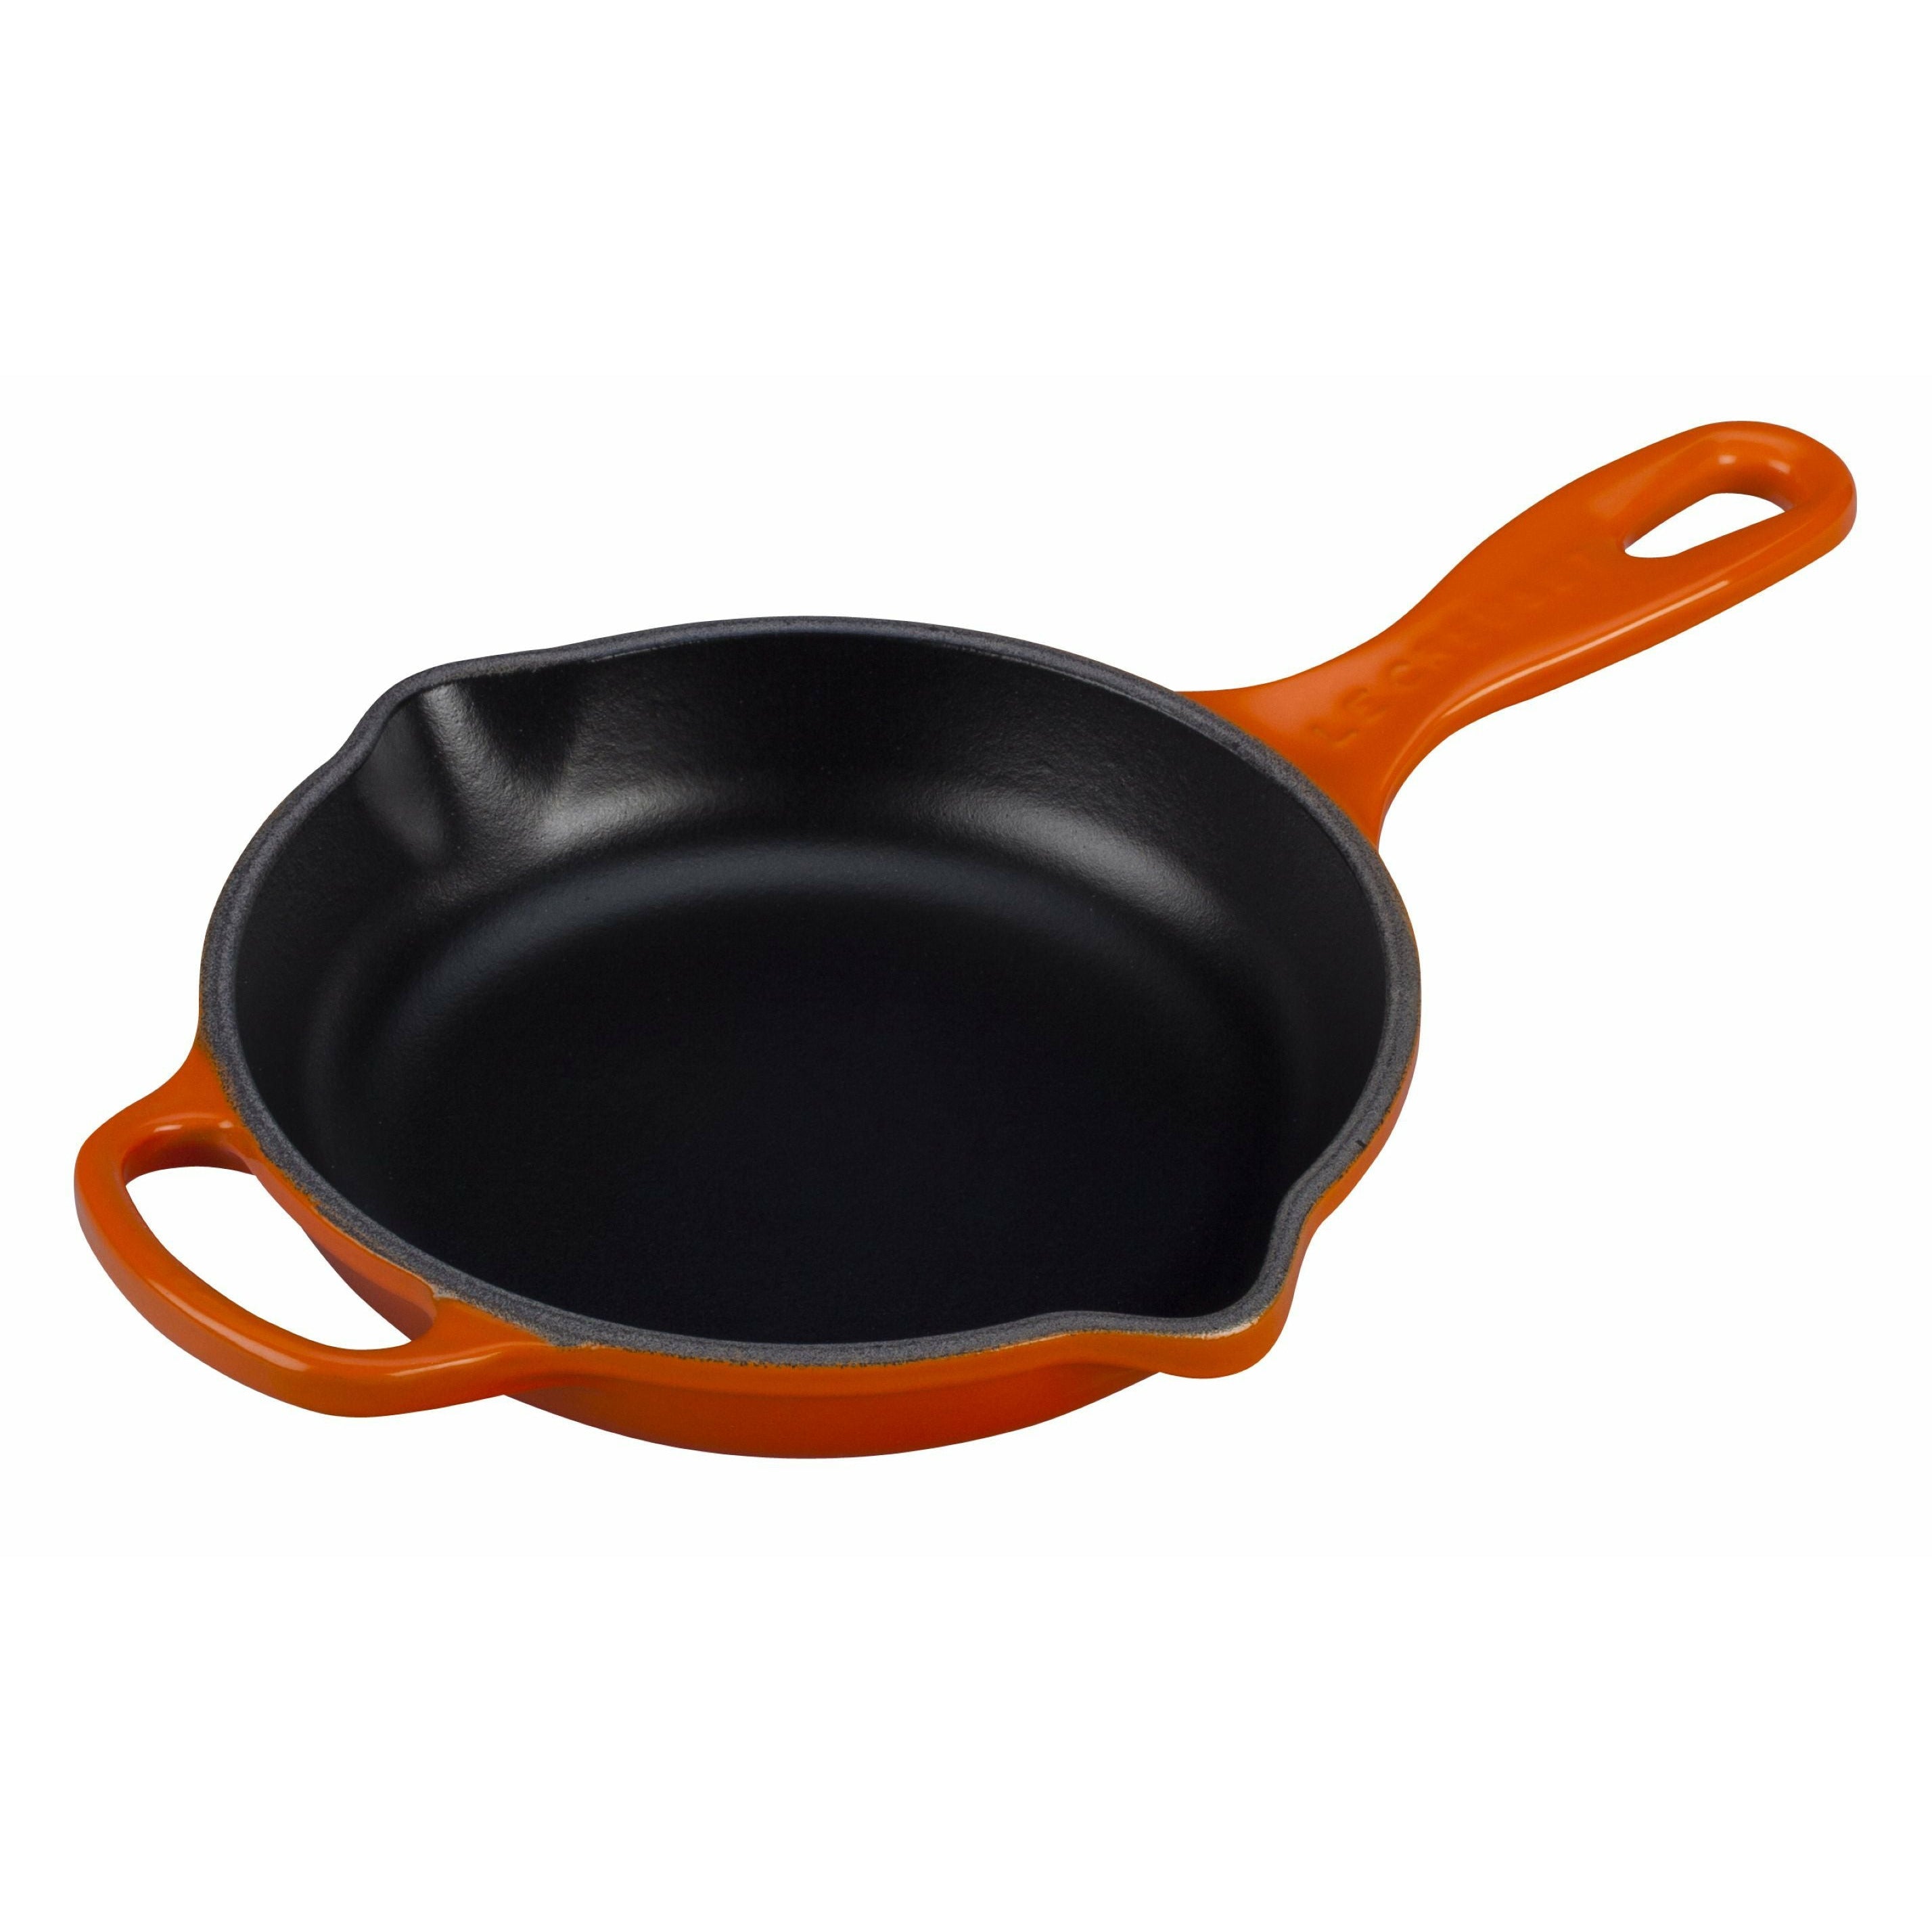 Le Creuset Signature Round Frying And Serving Pan 16 Cm, Oven Red